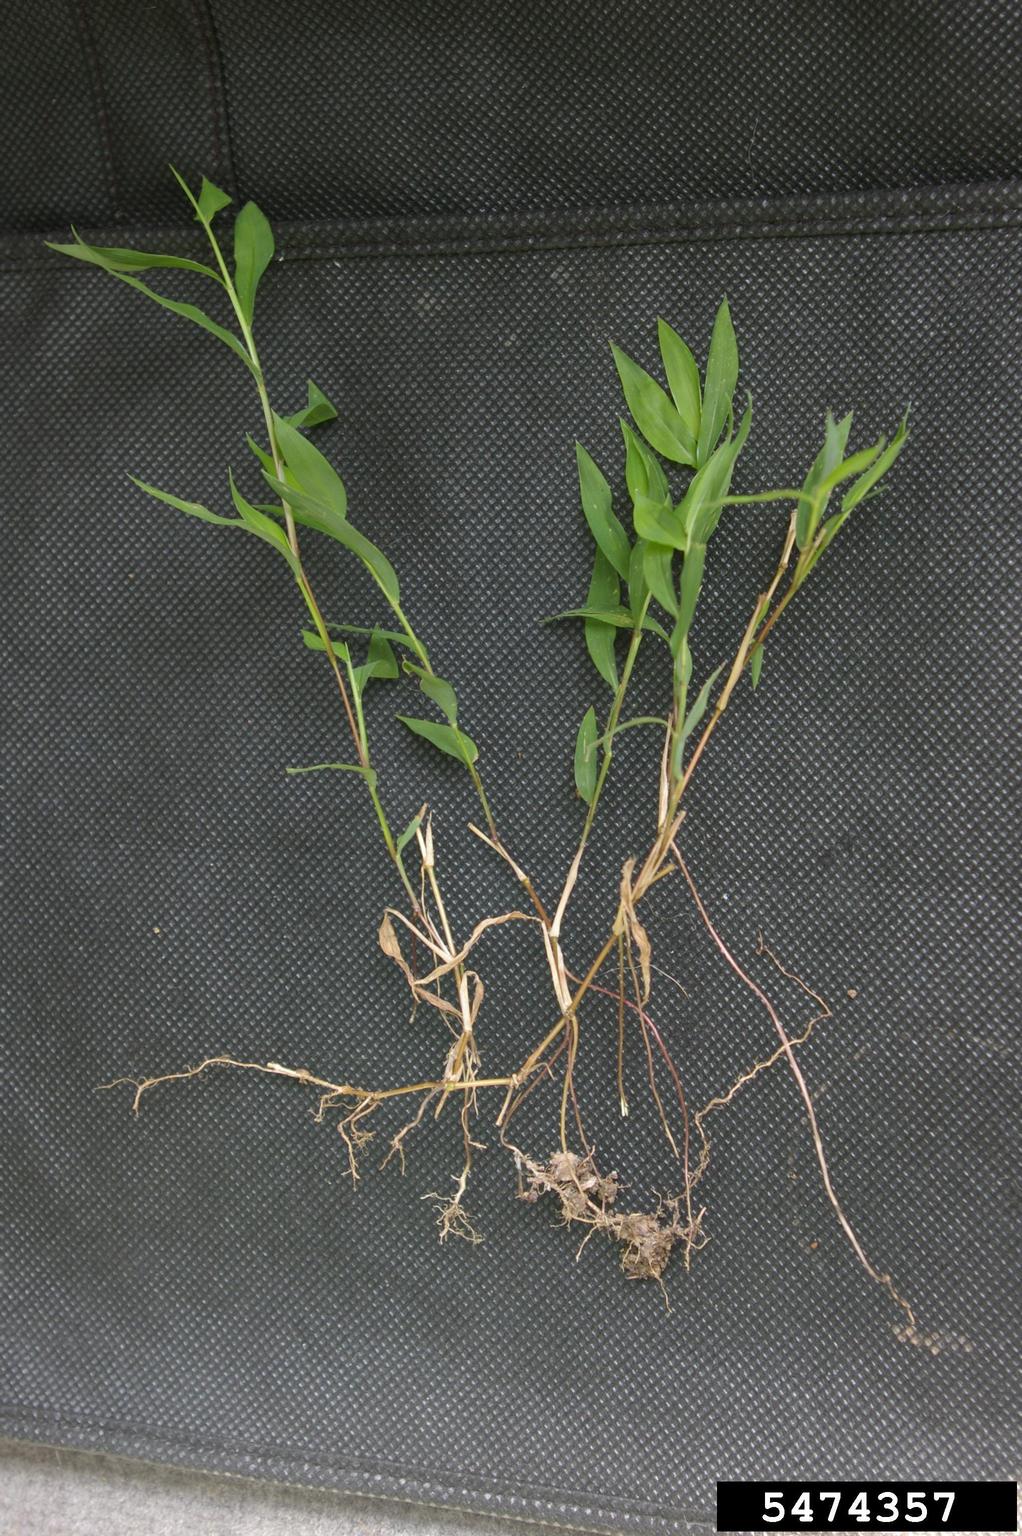 Japanese Stiltgrass root and shoot systems. Roots of multiple shoots are connected by horizontal stolons.